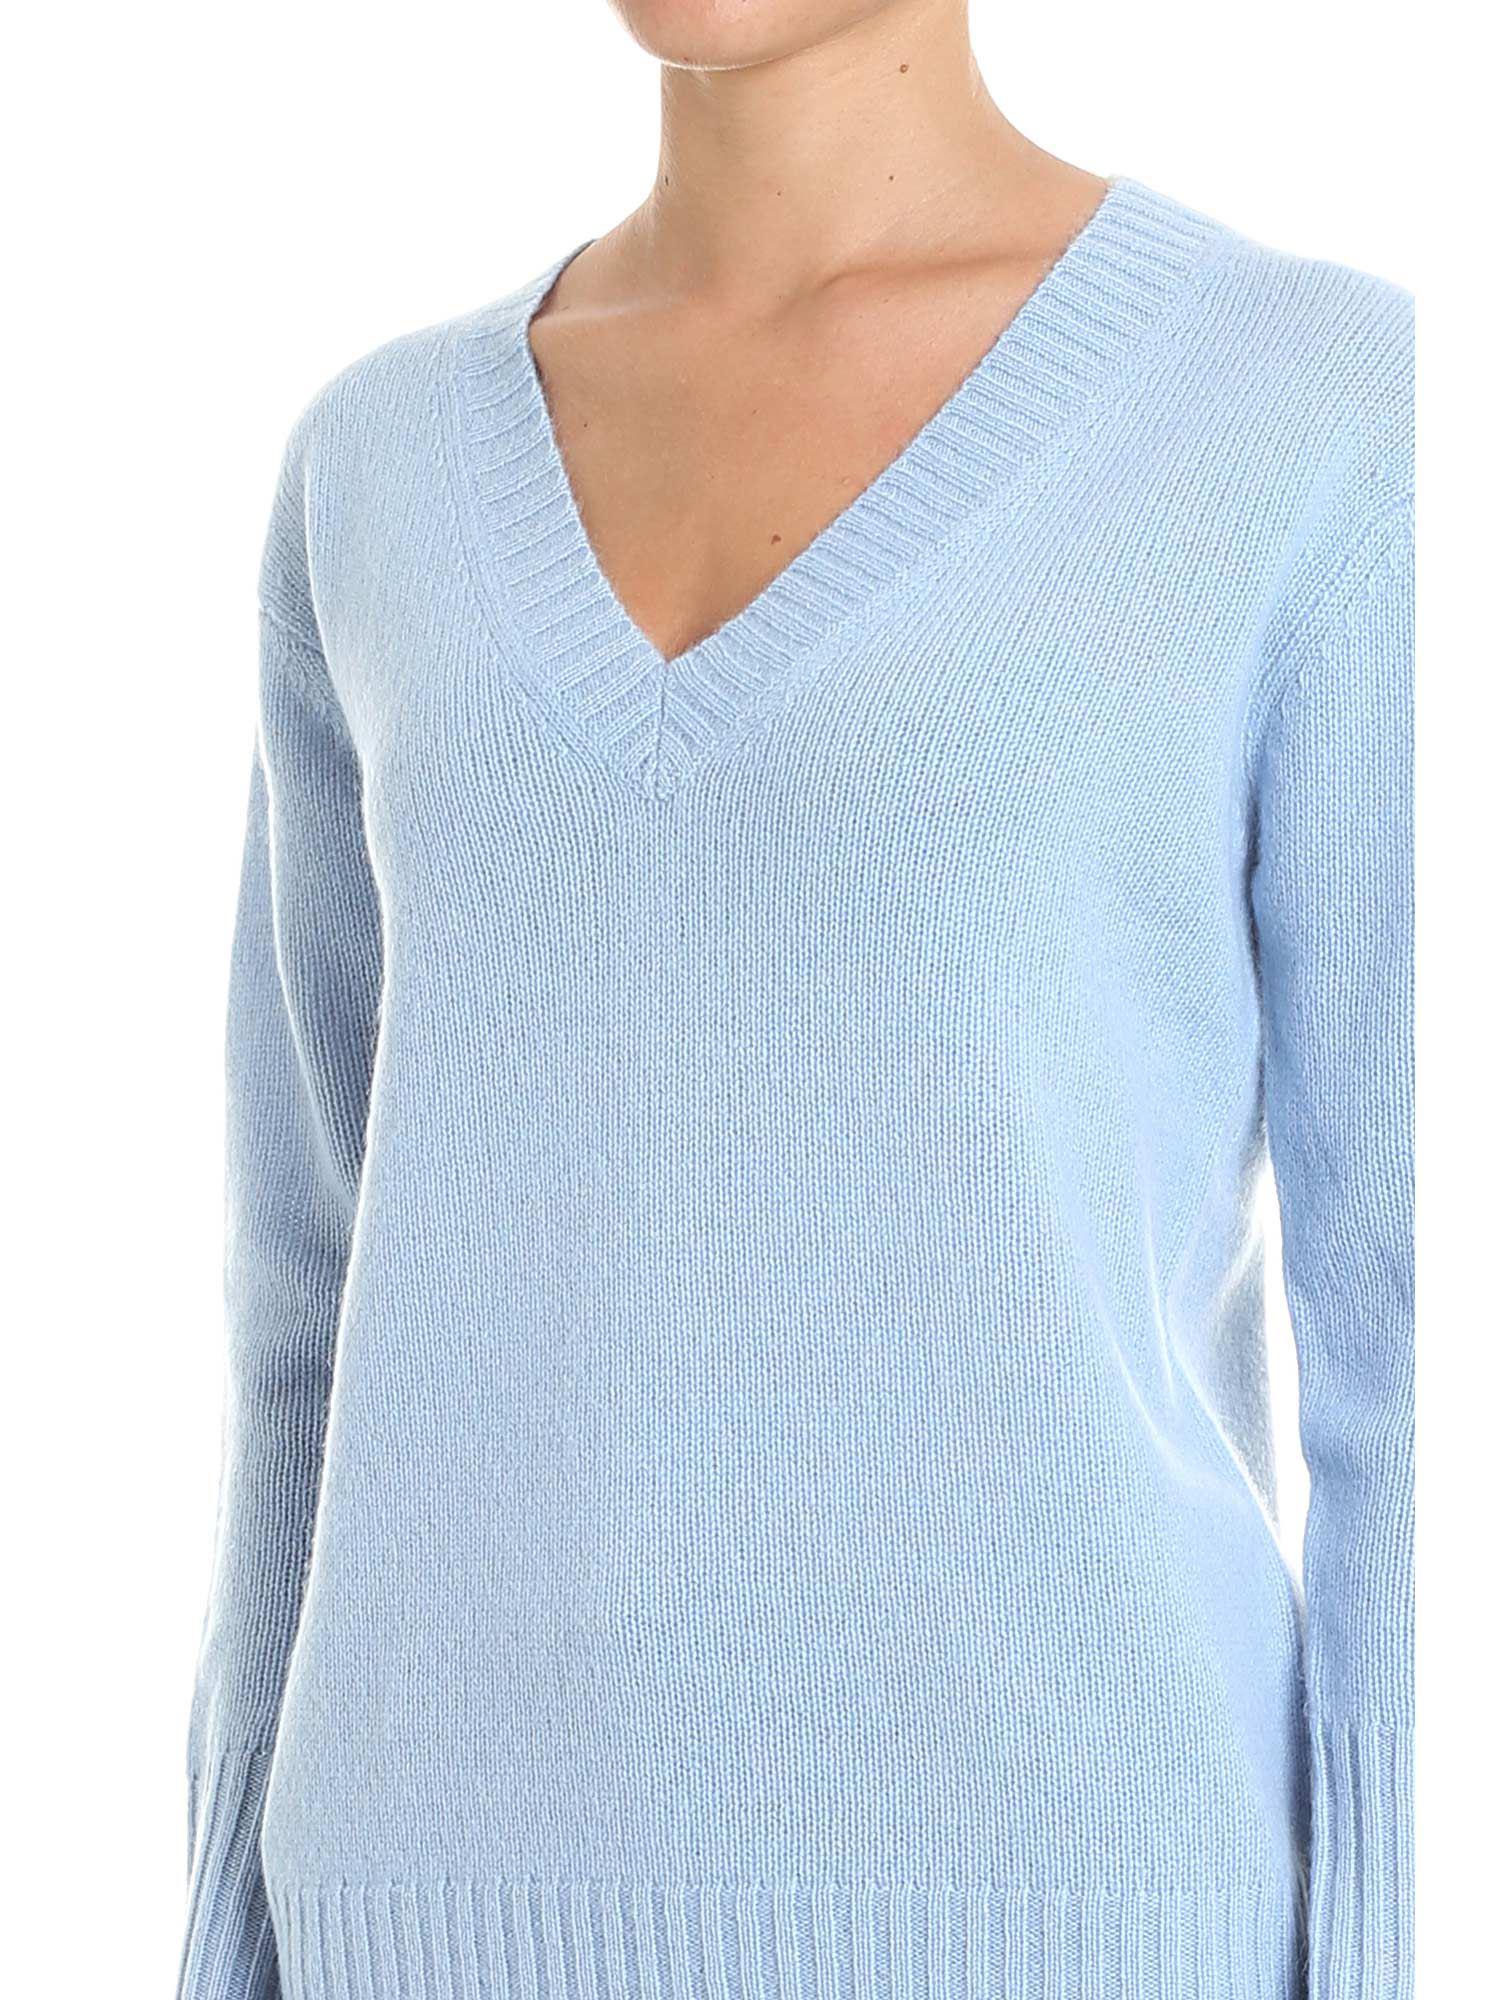 Buy > pale blue cashmere cardigan > in stock